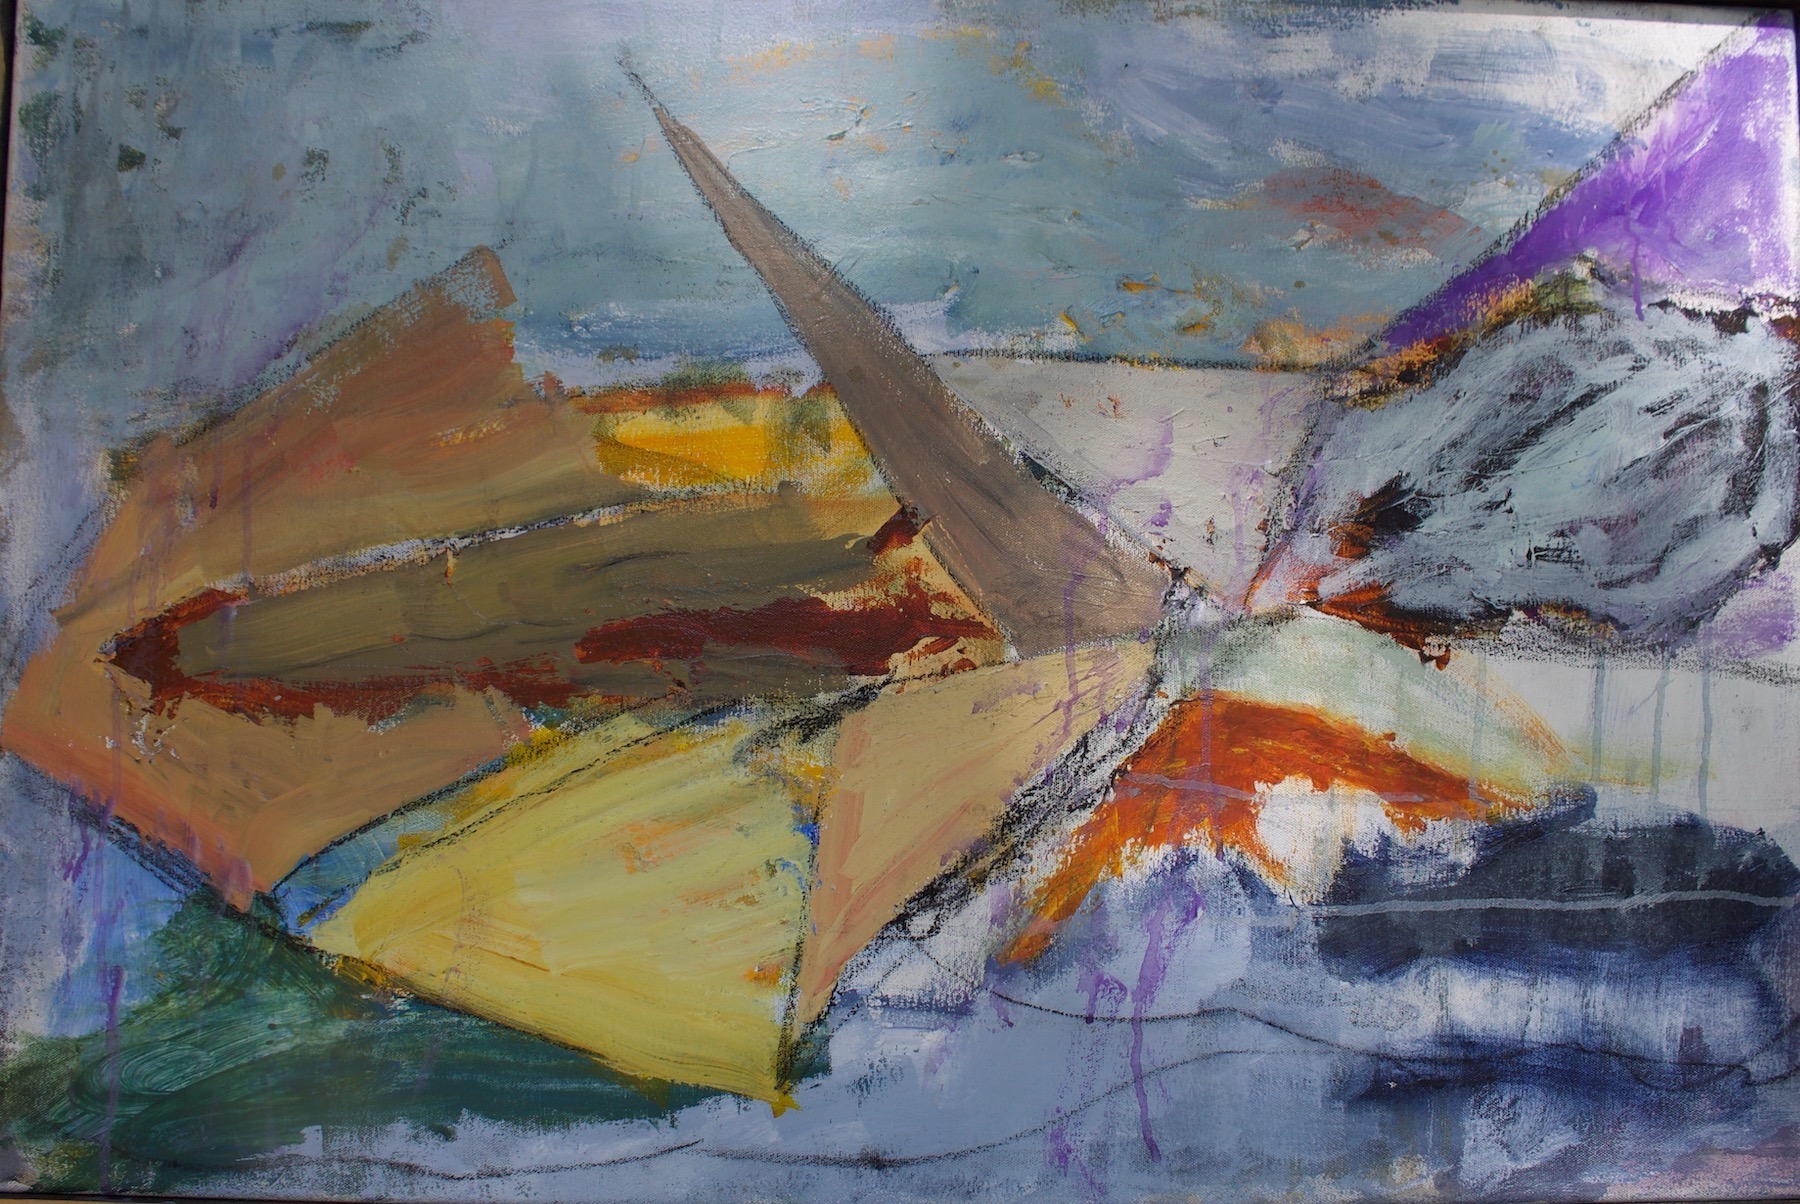   Lampedusa Shipwreck , acrylic on canvas, 24 x 36 inches 